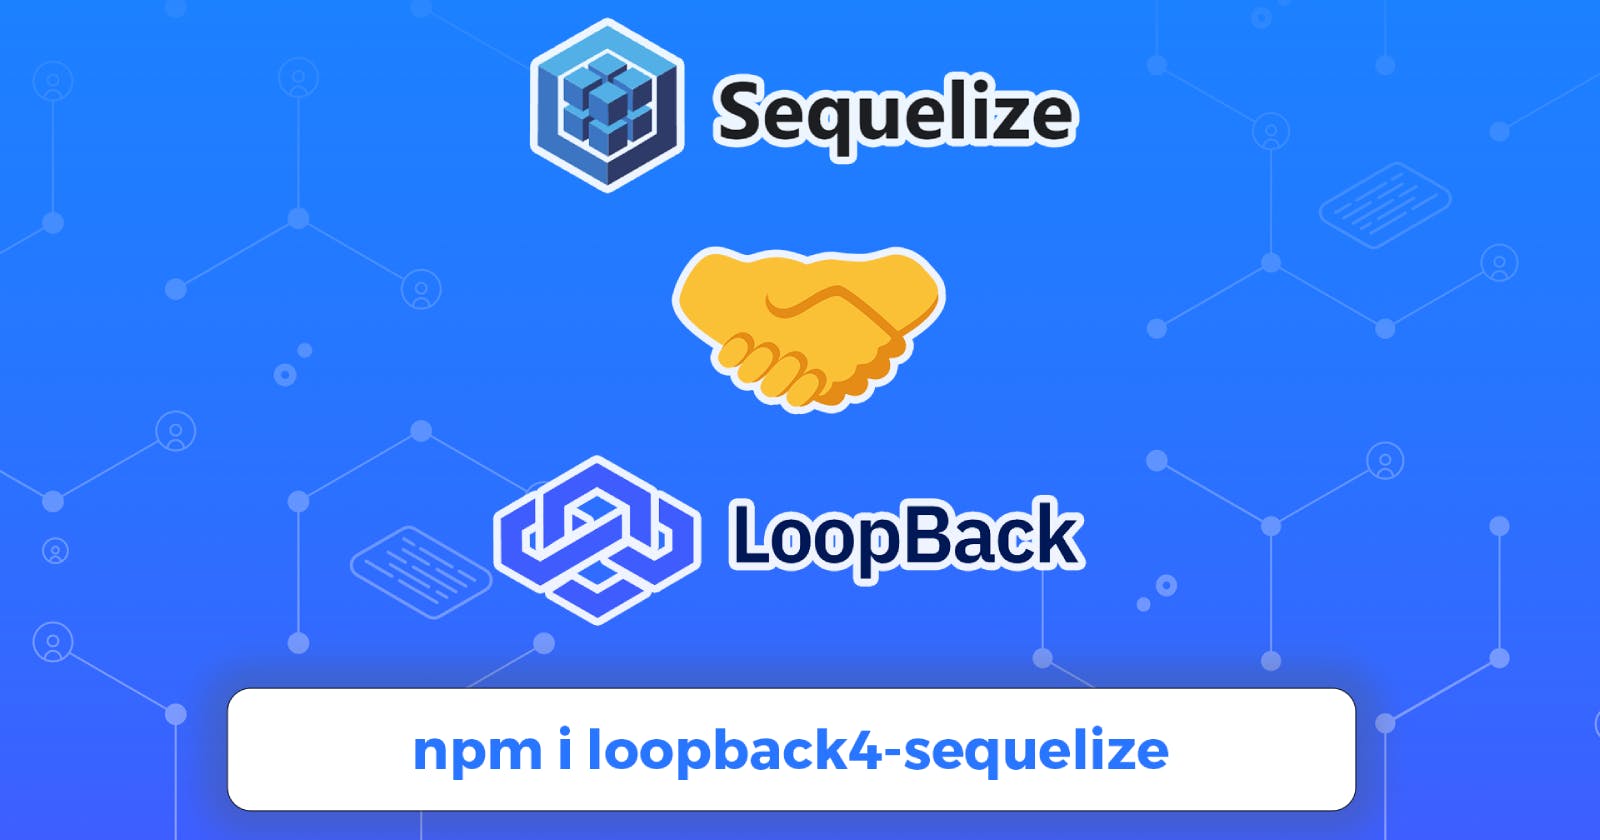 How to Use Sequelize in a Loopback 4 Project?